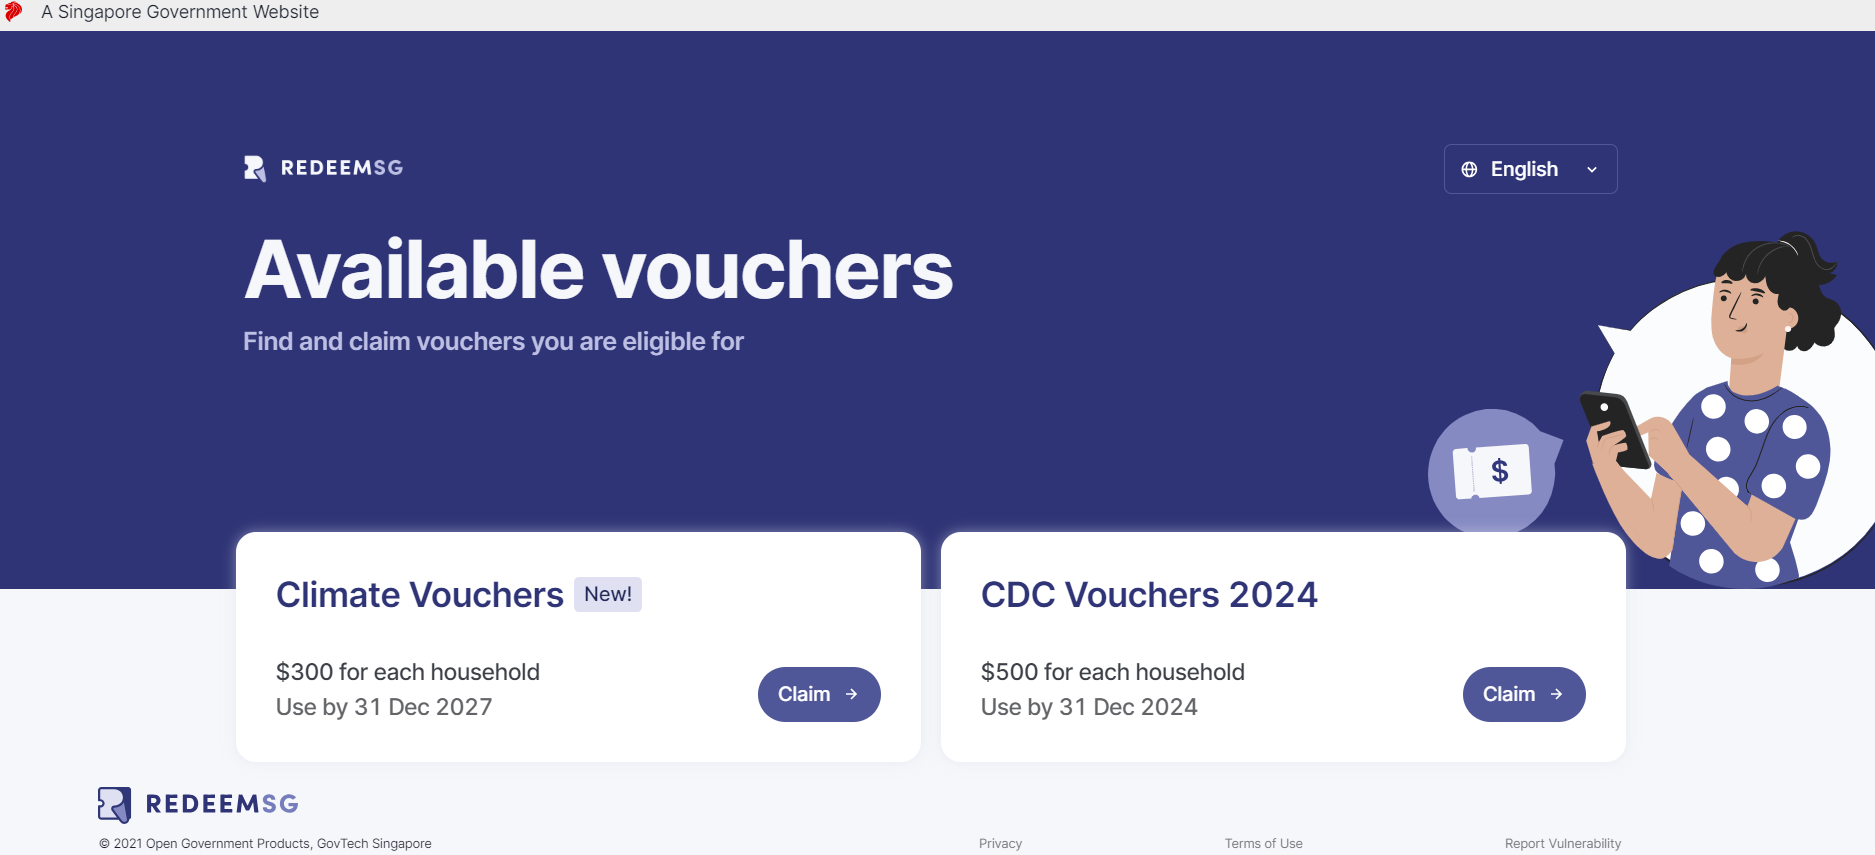 Singapore CDC Voucher 2024 - Eligibility and Payout Date